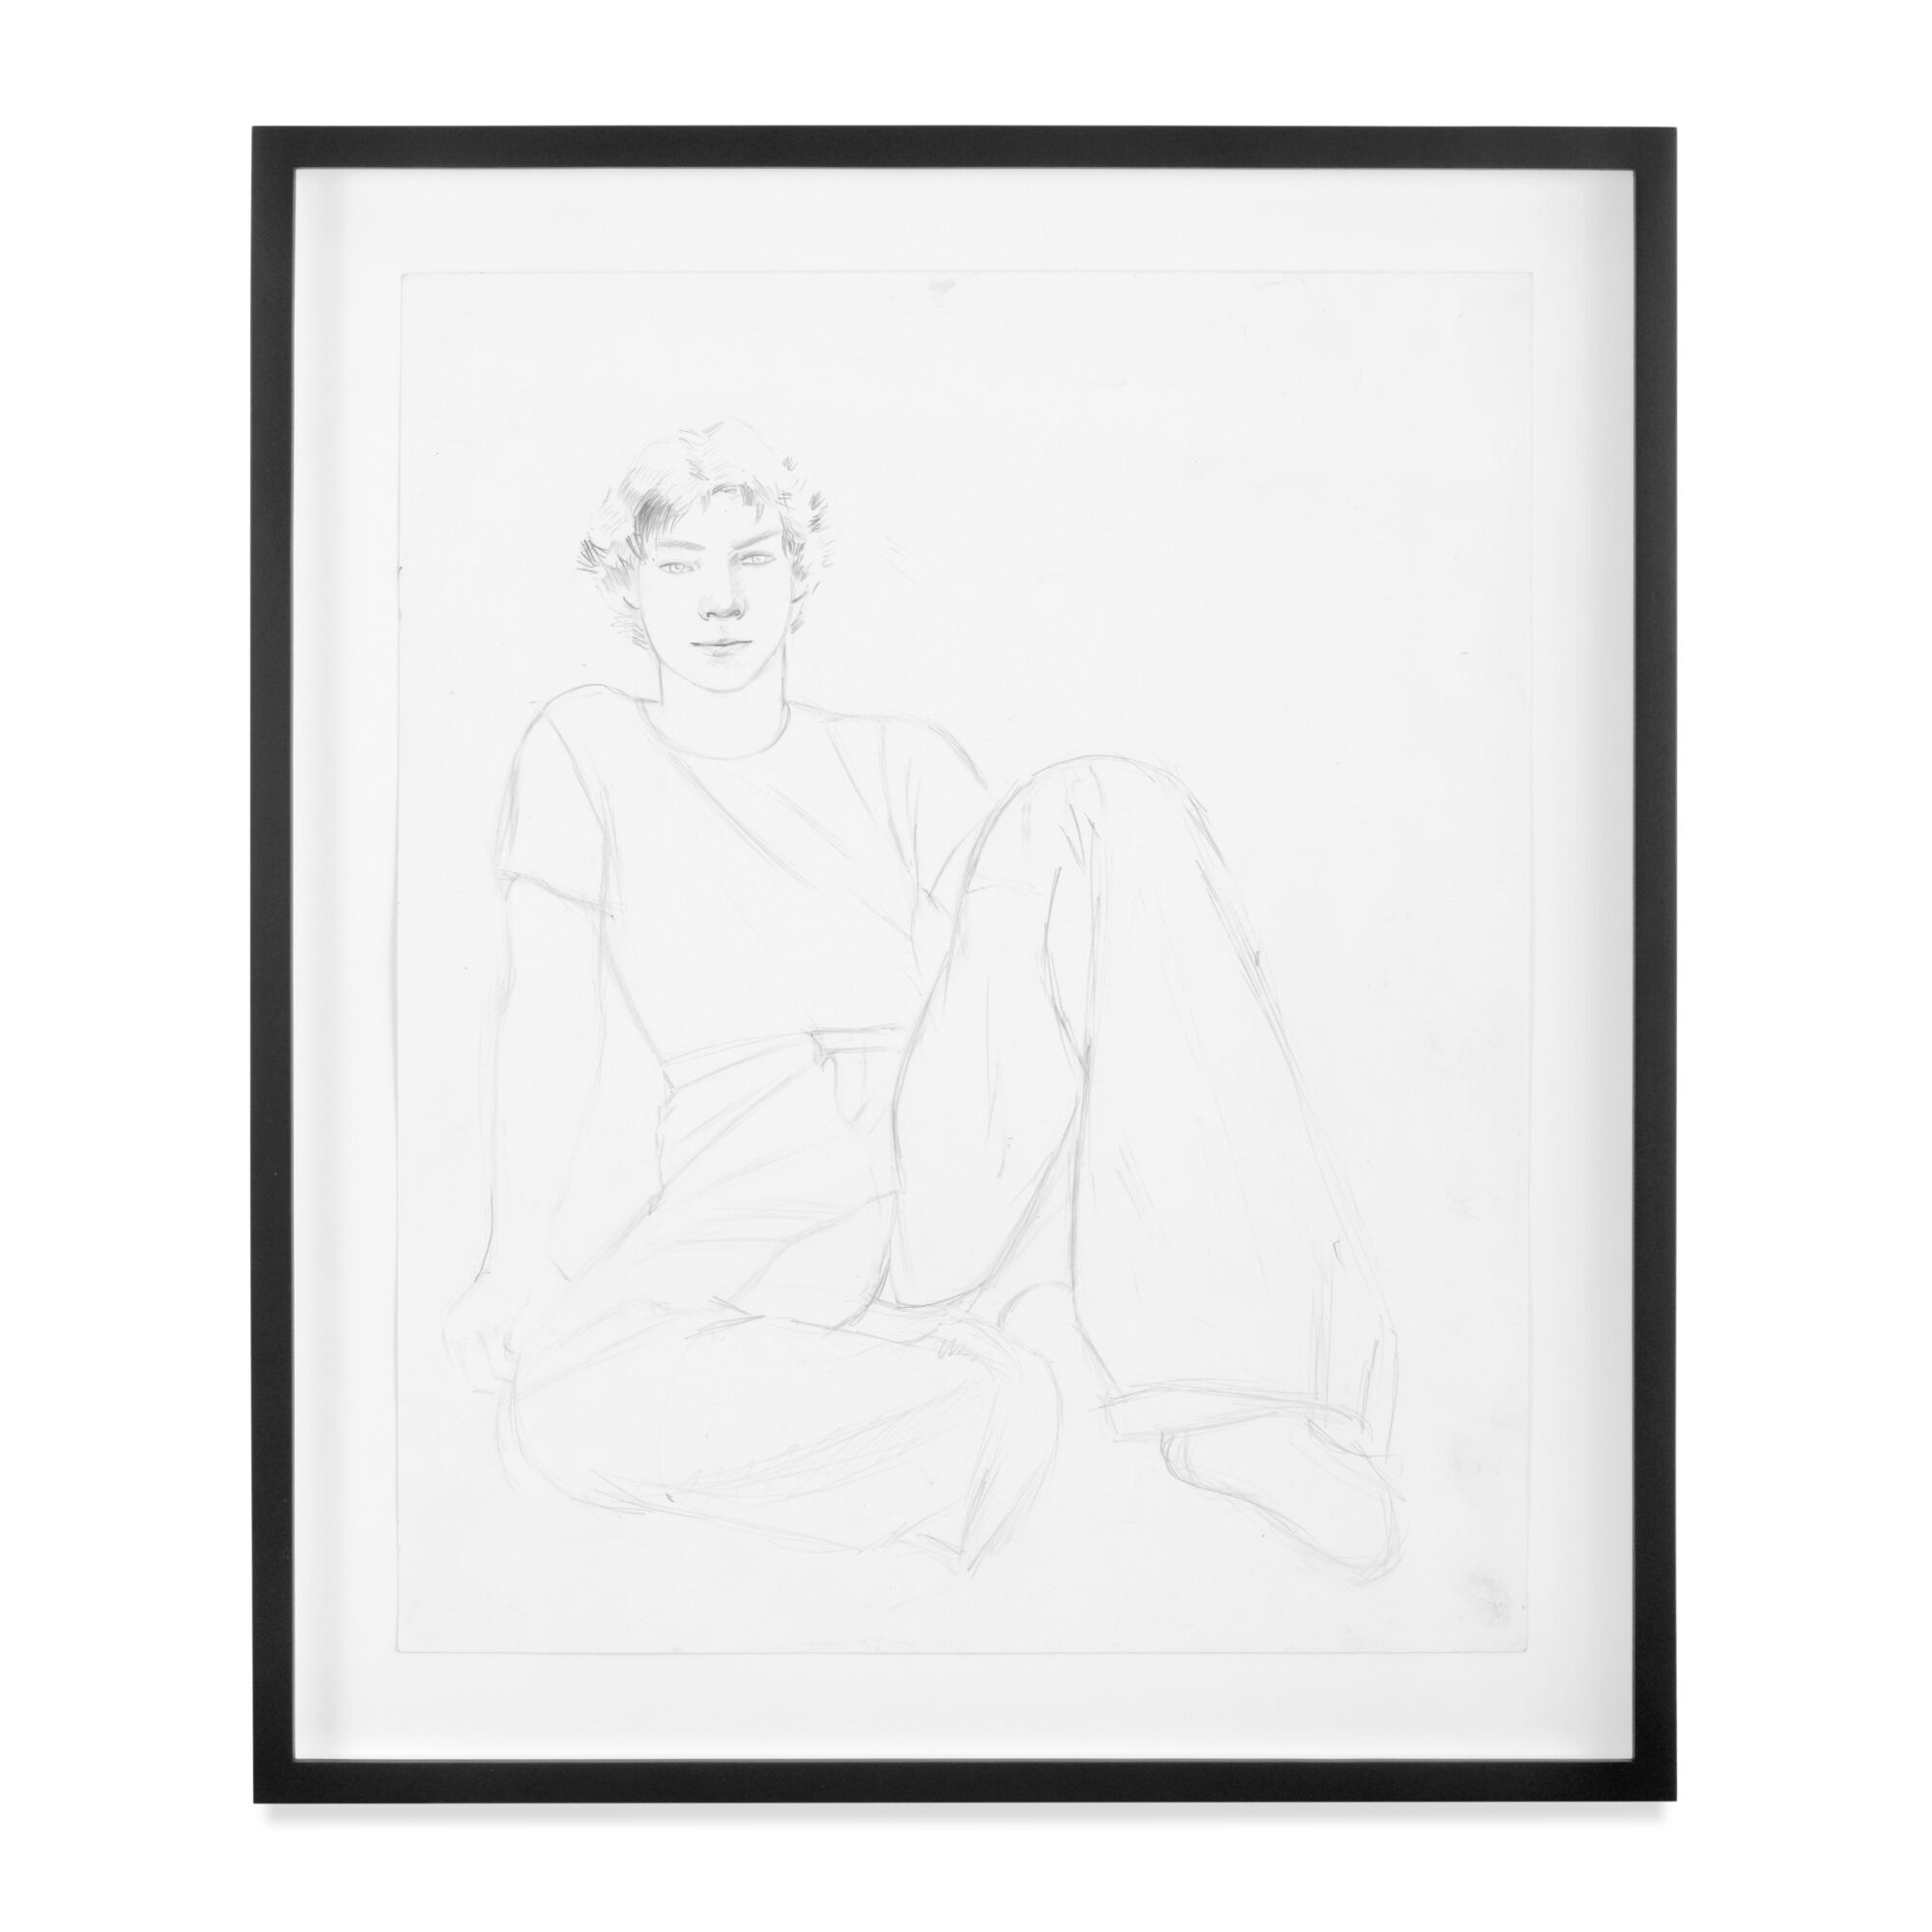 The Wick - Larry Stanton, Untitled, c.1980 Drawing on paper 42.5 x 34.8 cm, 16 3/4 x 13 3/4 ins 51.5 x 43.7 cm, 20 1/4 x 17 1/4 ins framed